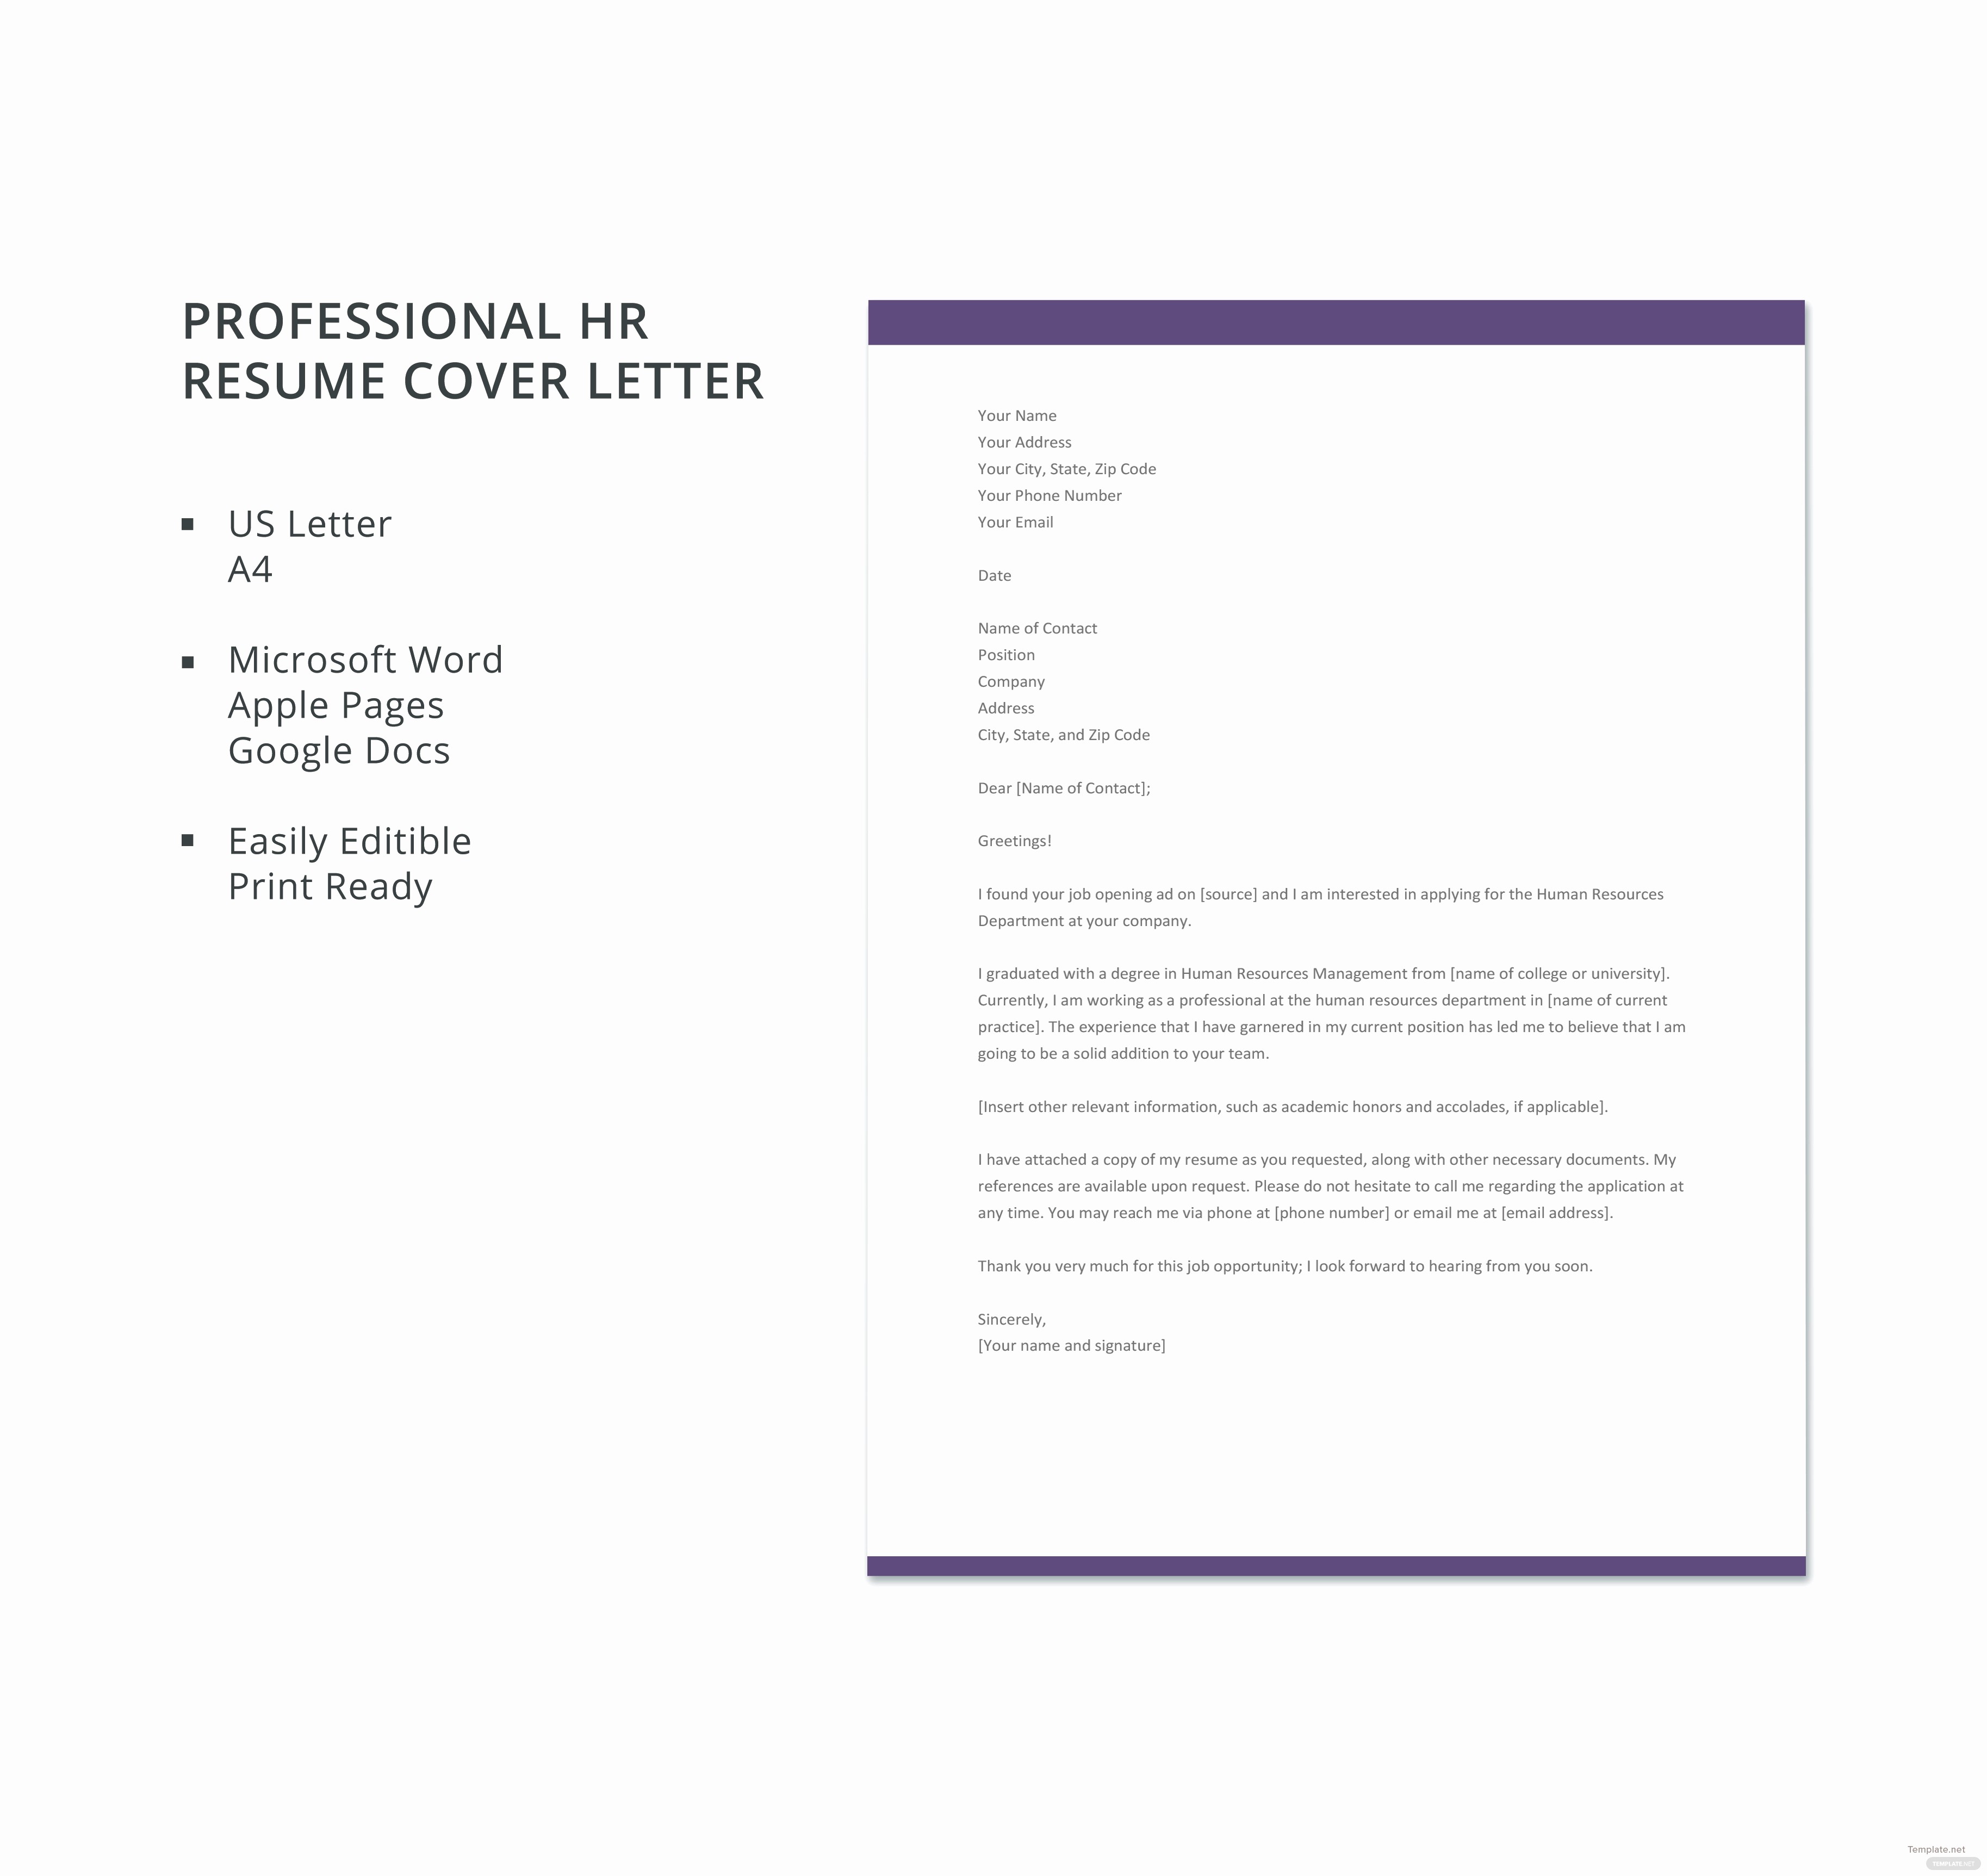 Free Resume Cover Letter Template New Free Professional Hr Resume Cover Letter Template In